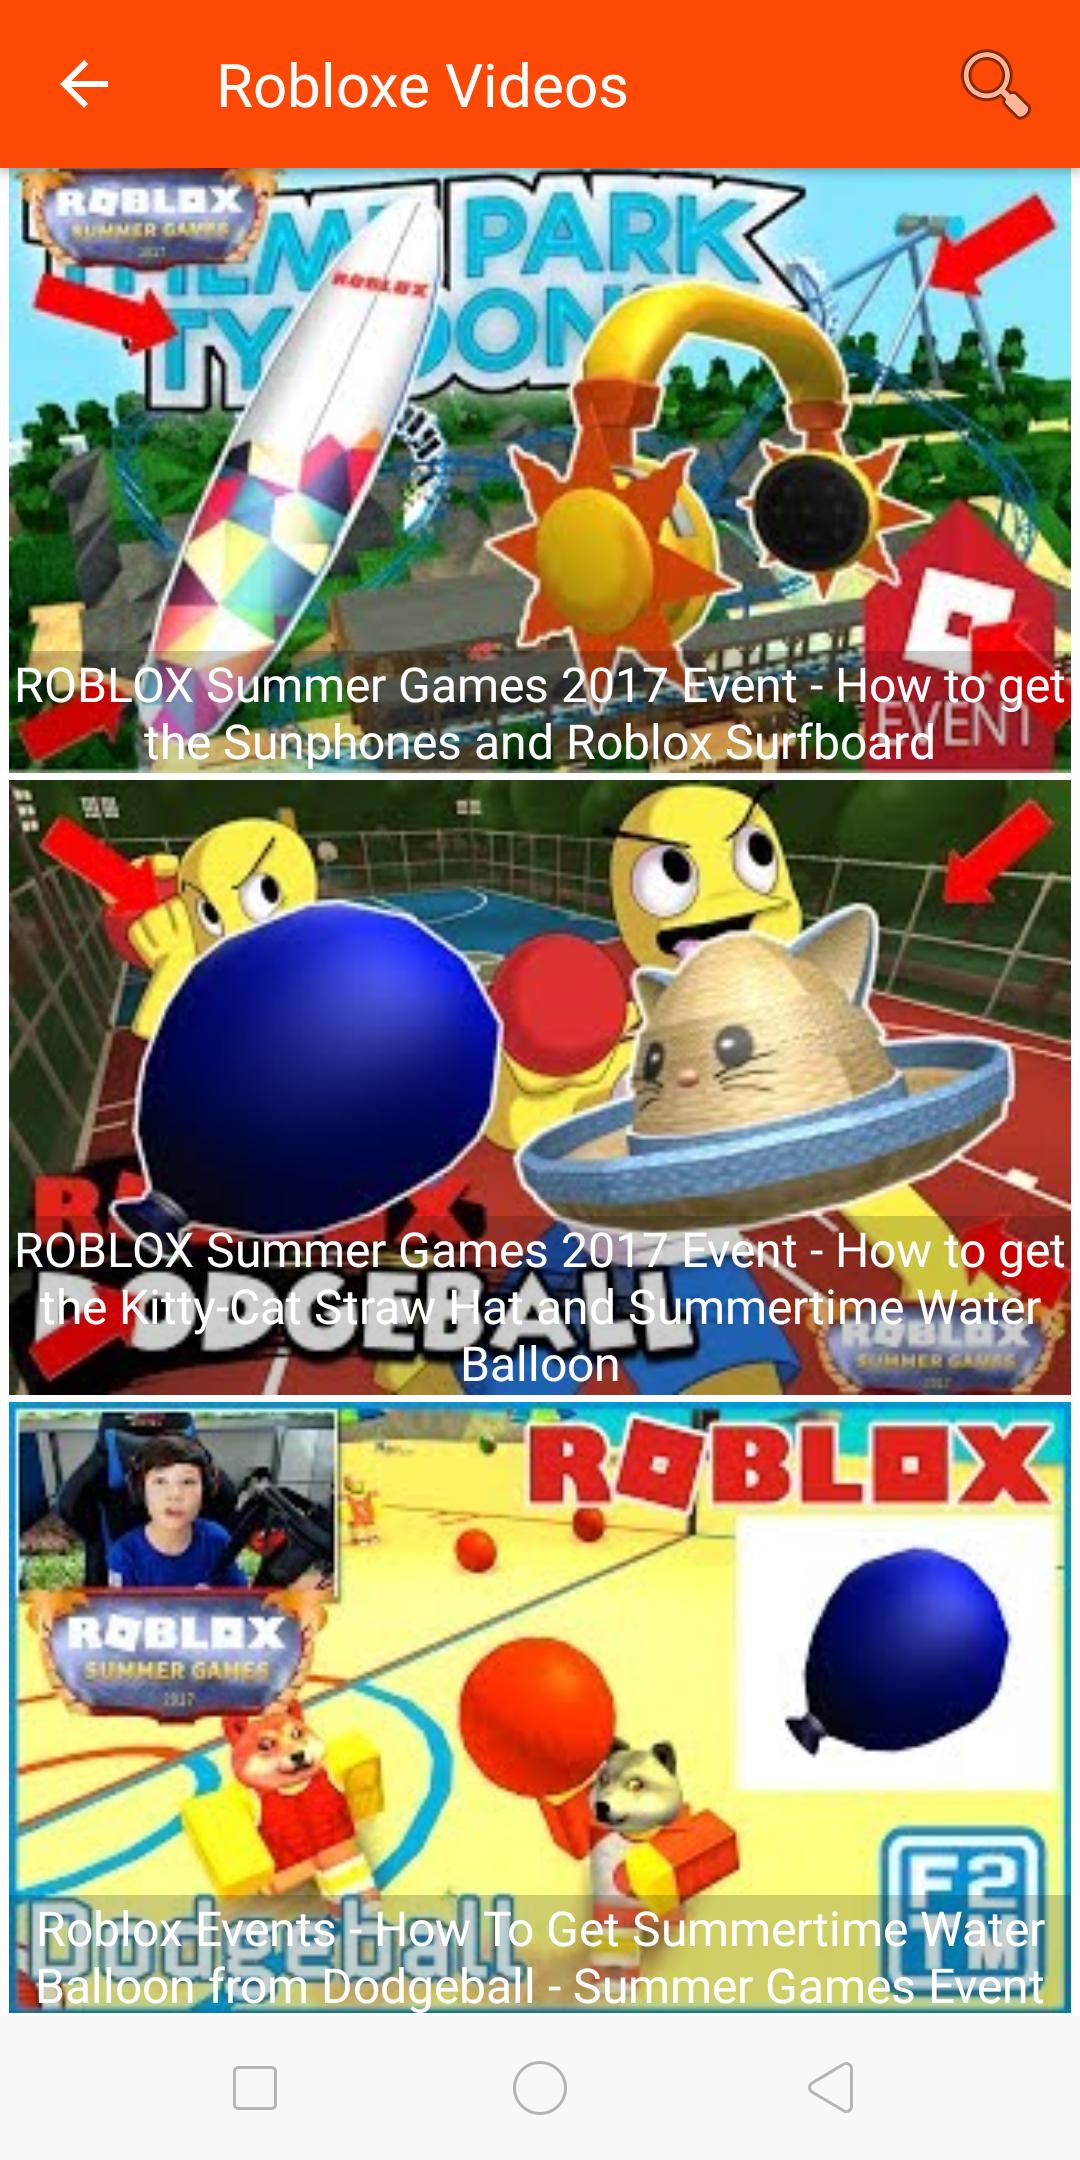 Roblox Events 2017